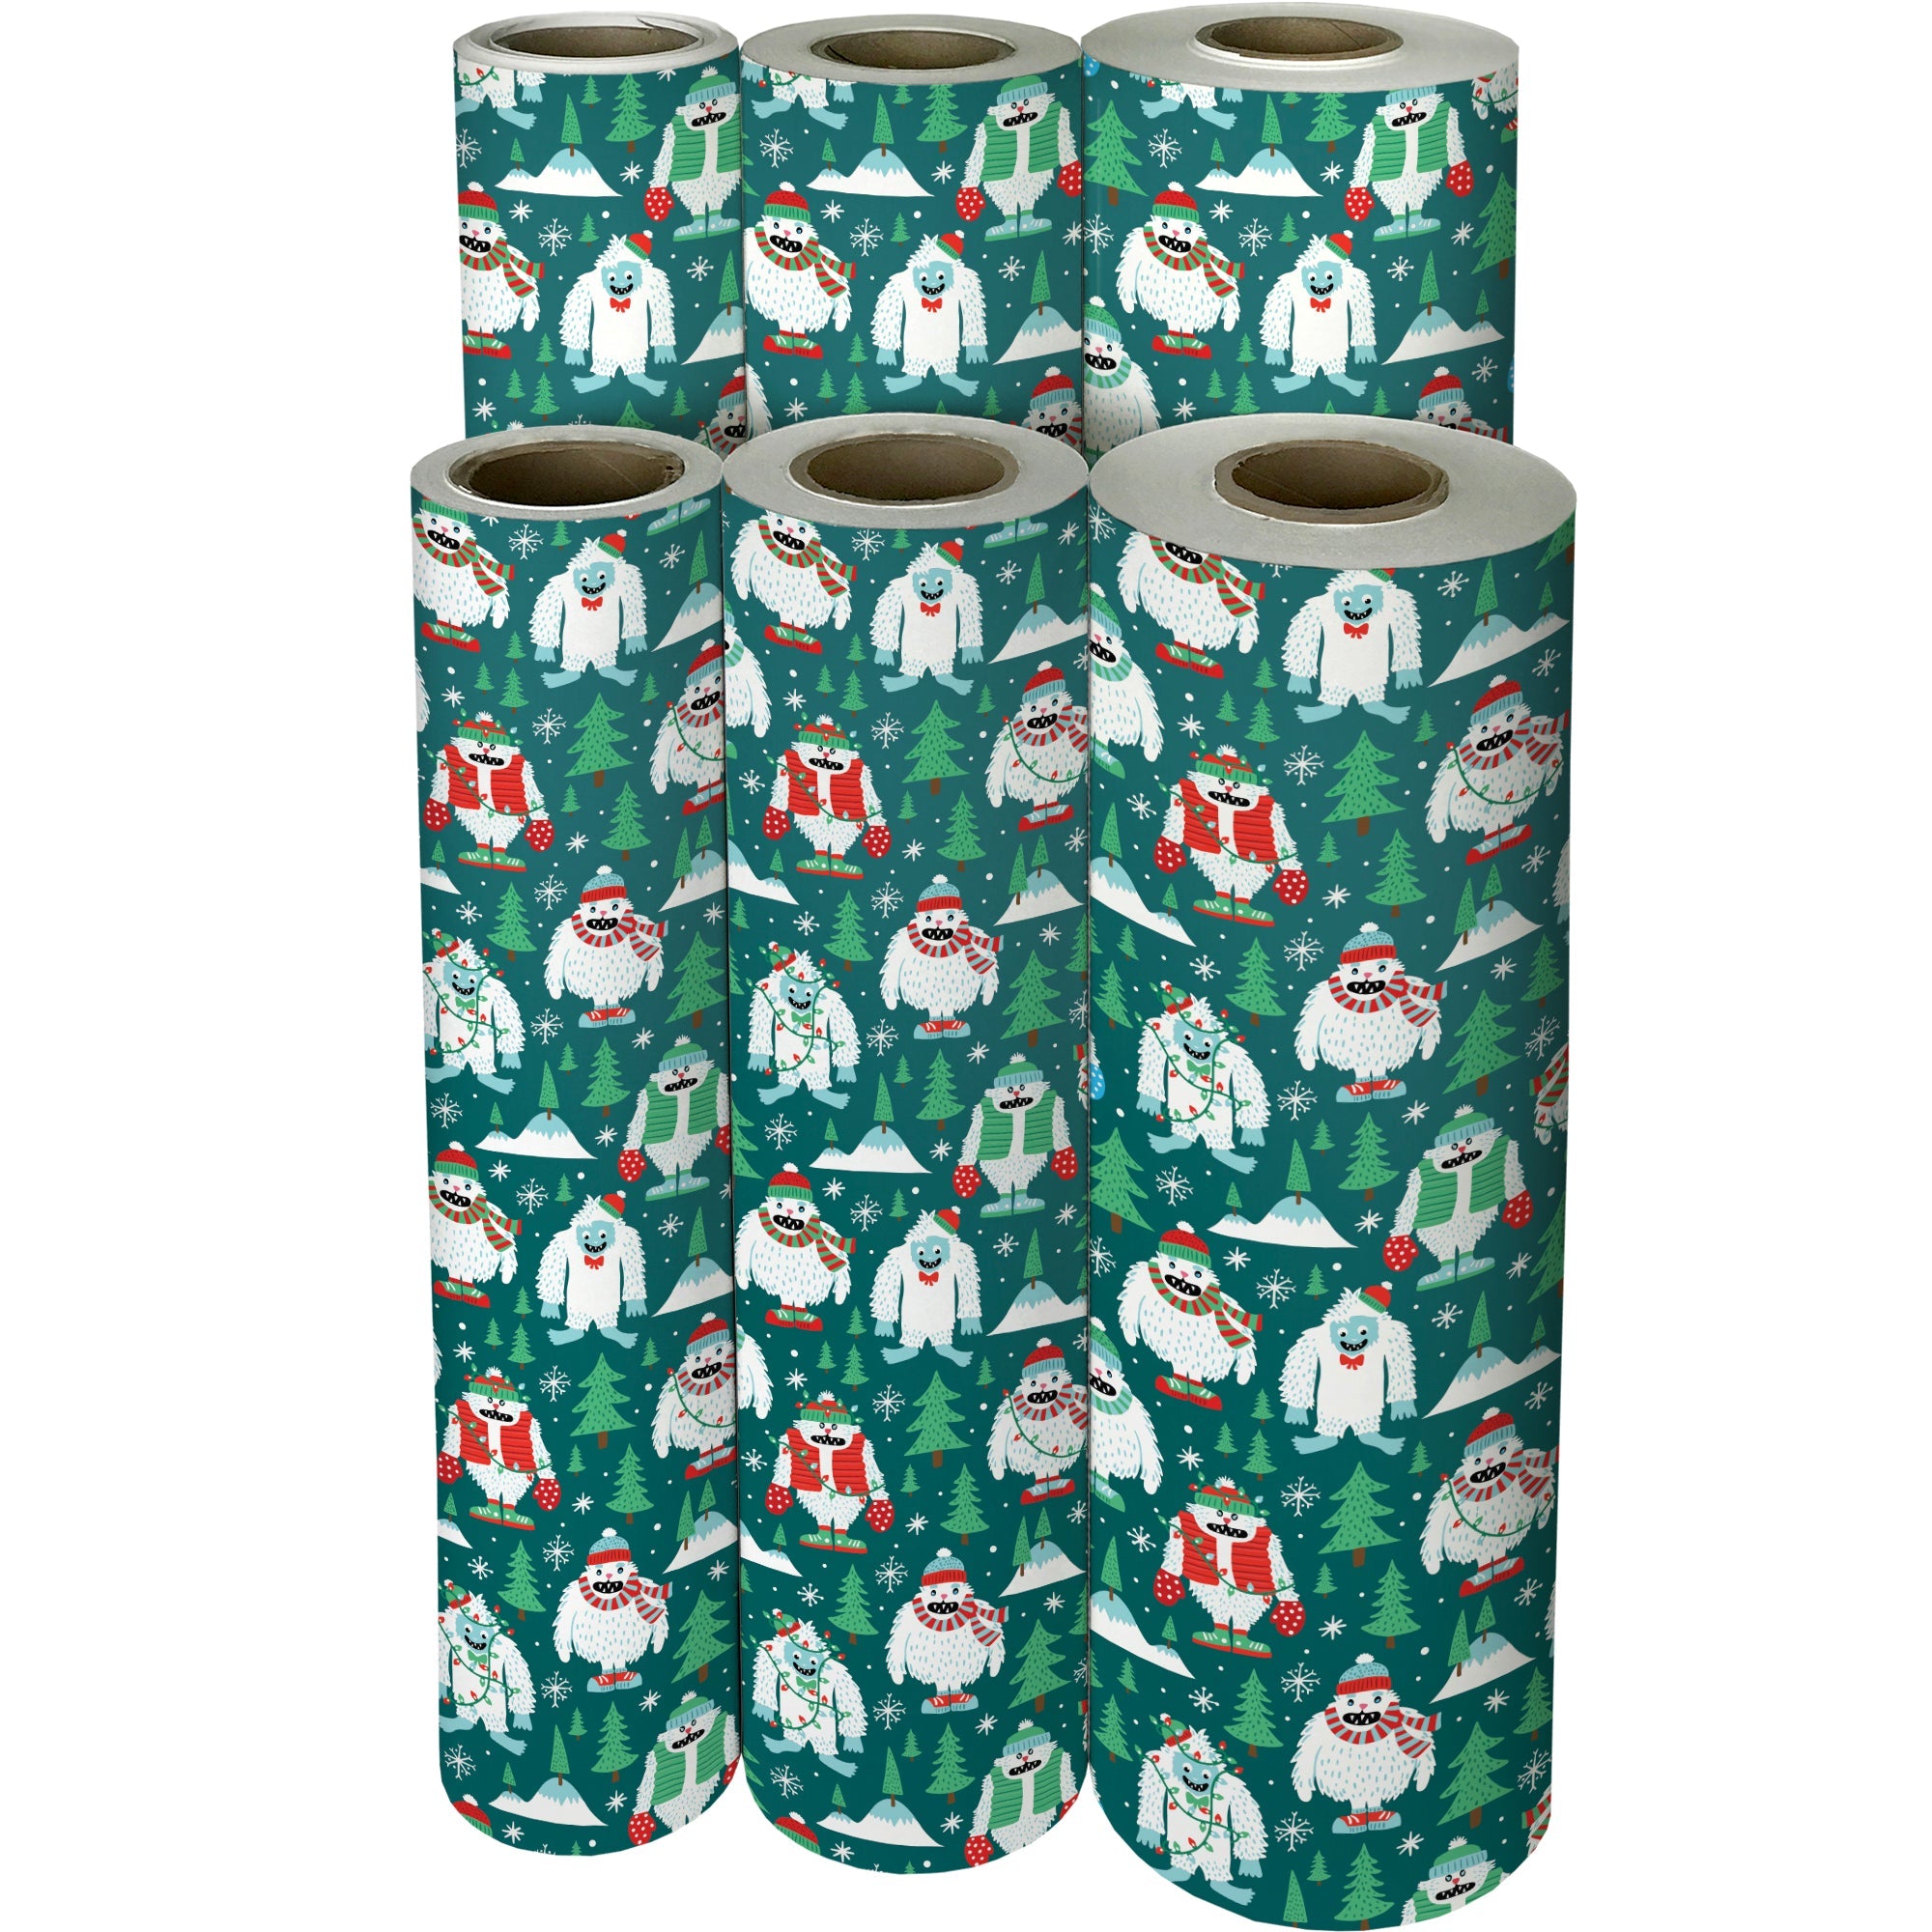 YETI Gifts, Gift Wrapped & Next Day Delivery